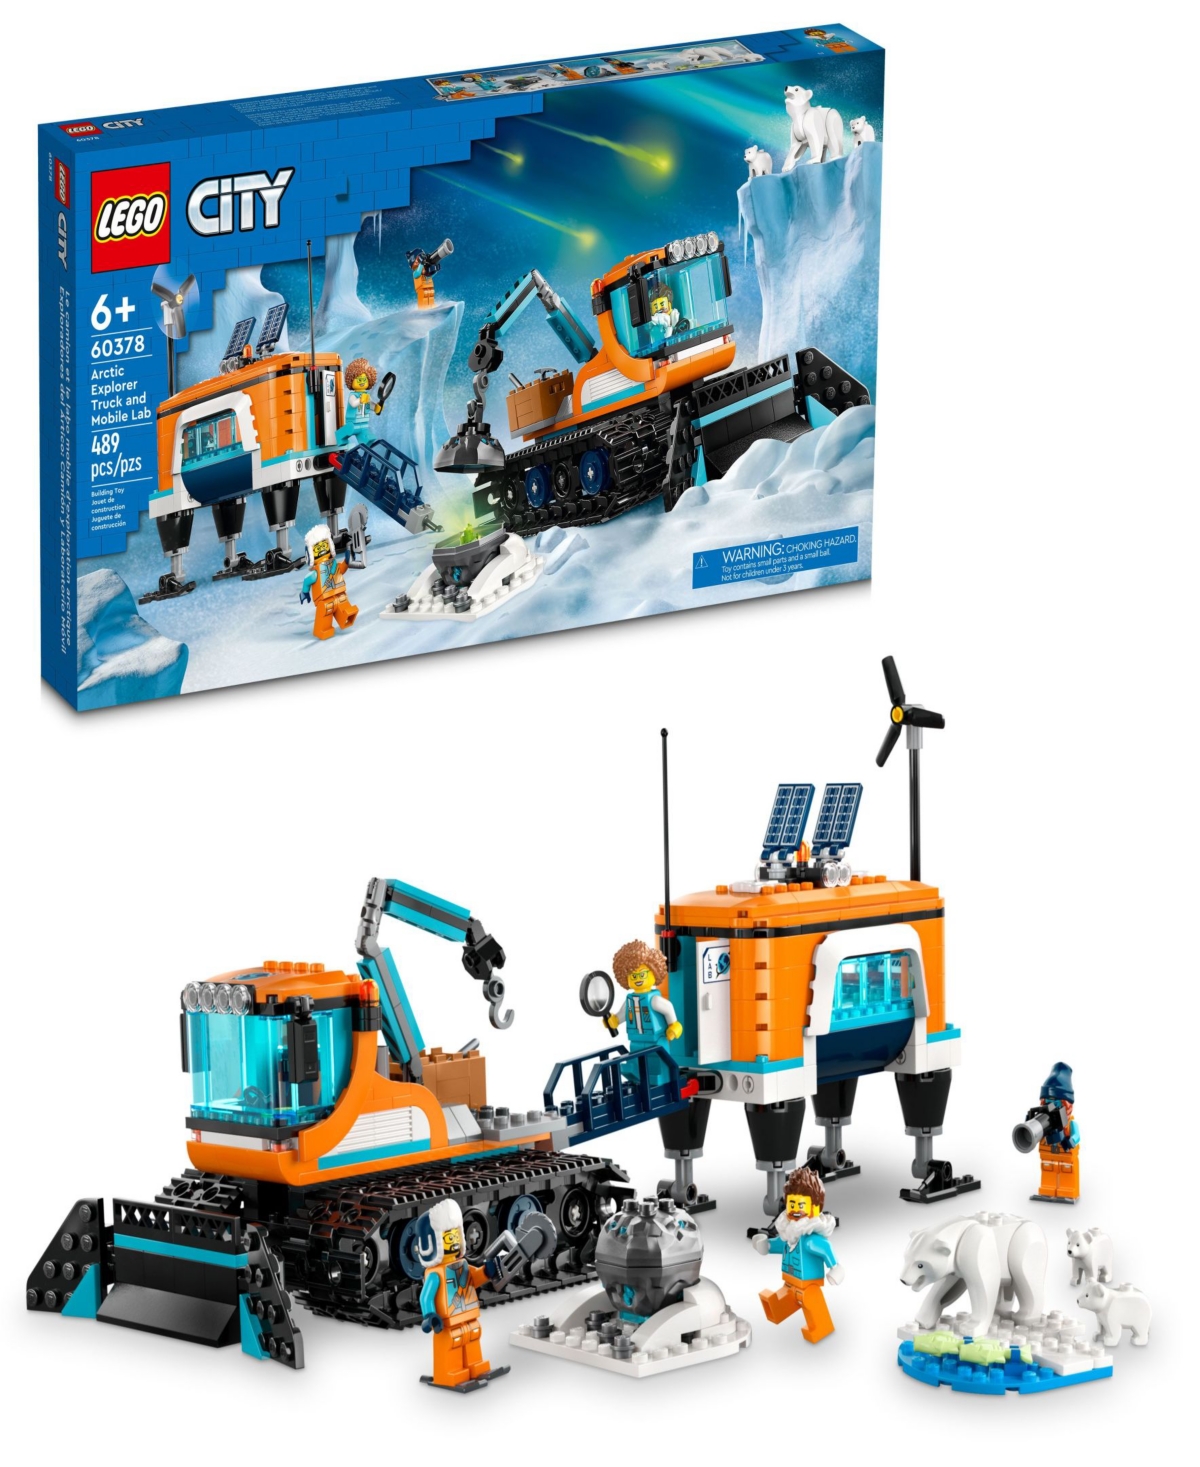 Lego Kids' City Arctic Explorer Truck And Mobile Lab Building Toy Set 60378 In Multicolor